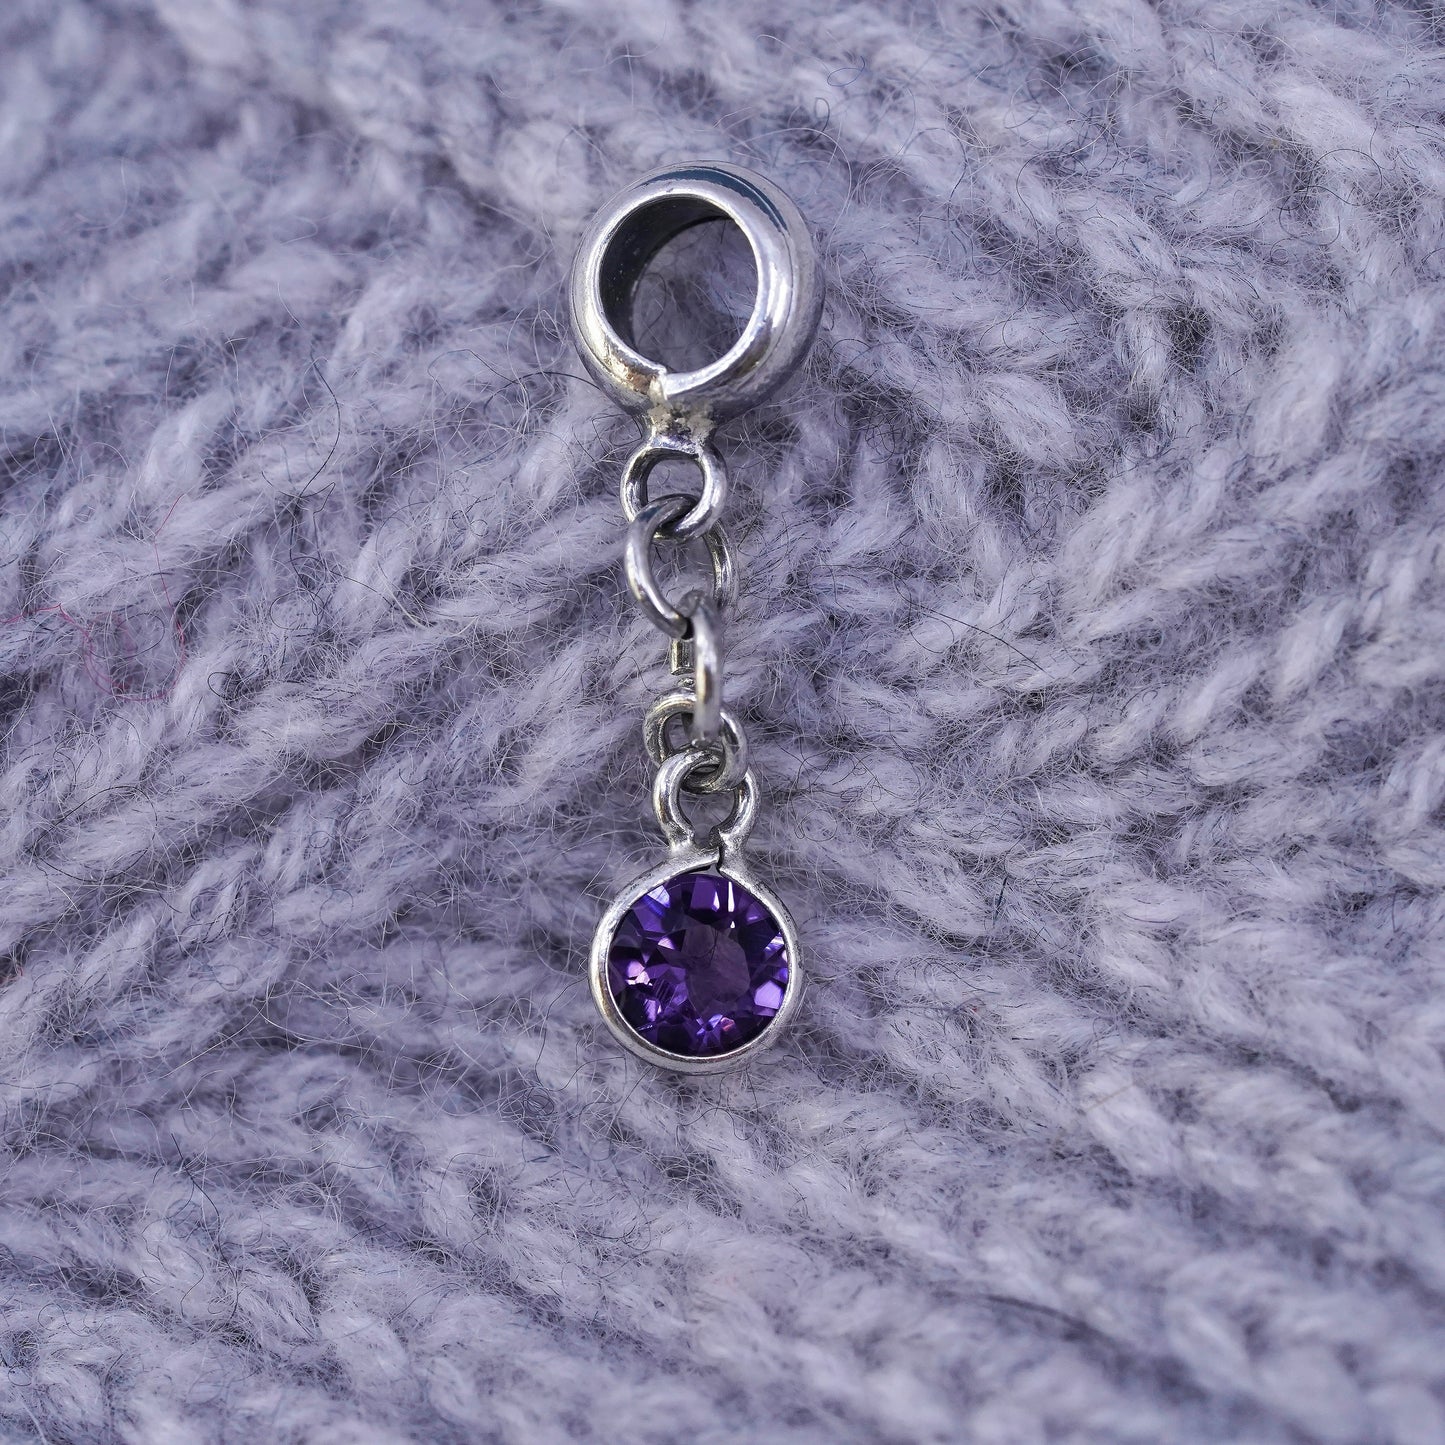 Vintage Sterling 925 silver handmade charm pendant with amethyst